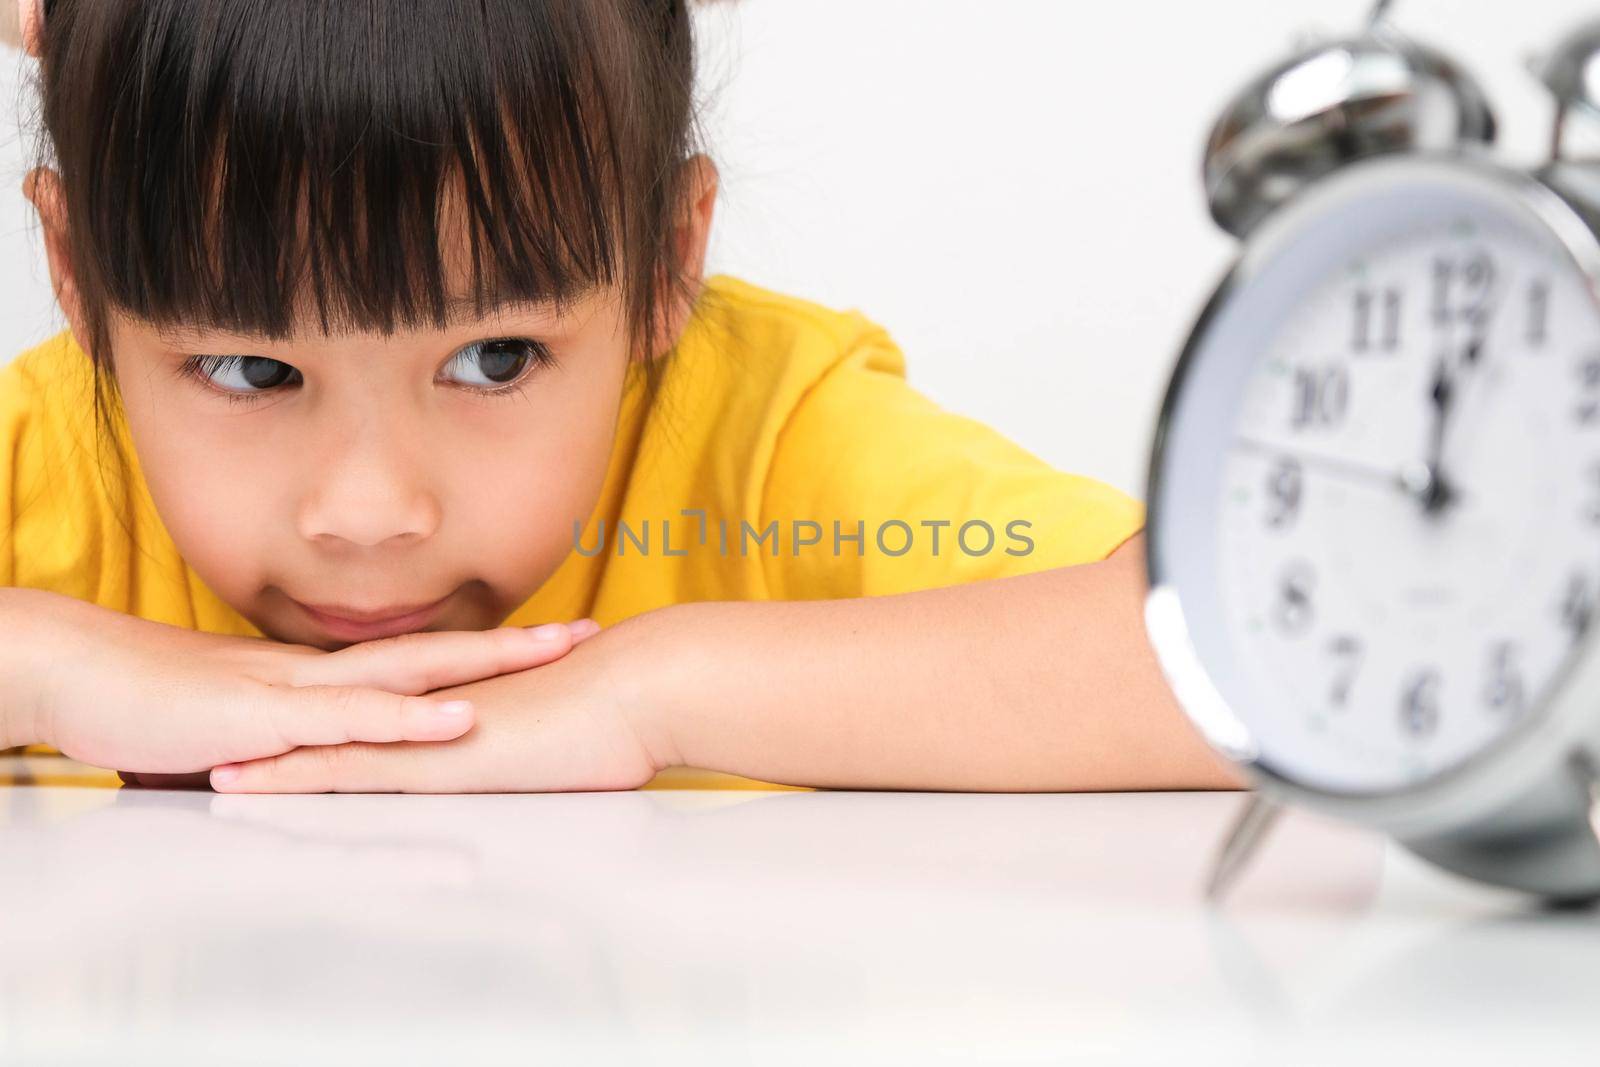 Cute dark haired girl puts her hand under her chin and looks at a vintage alarm clock while sitting at a table on a white background. by TEERASAK